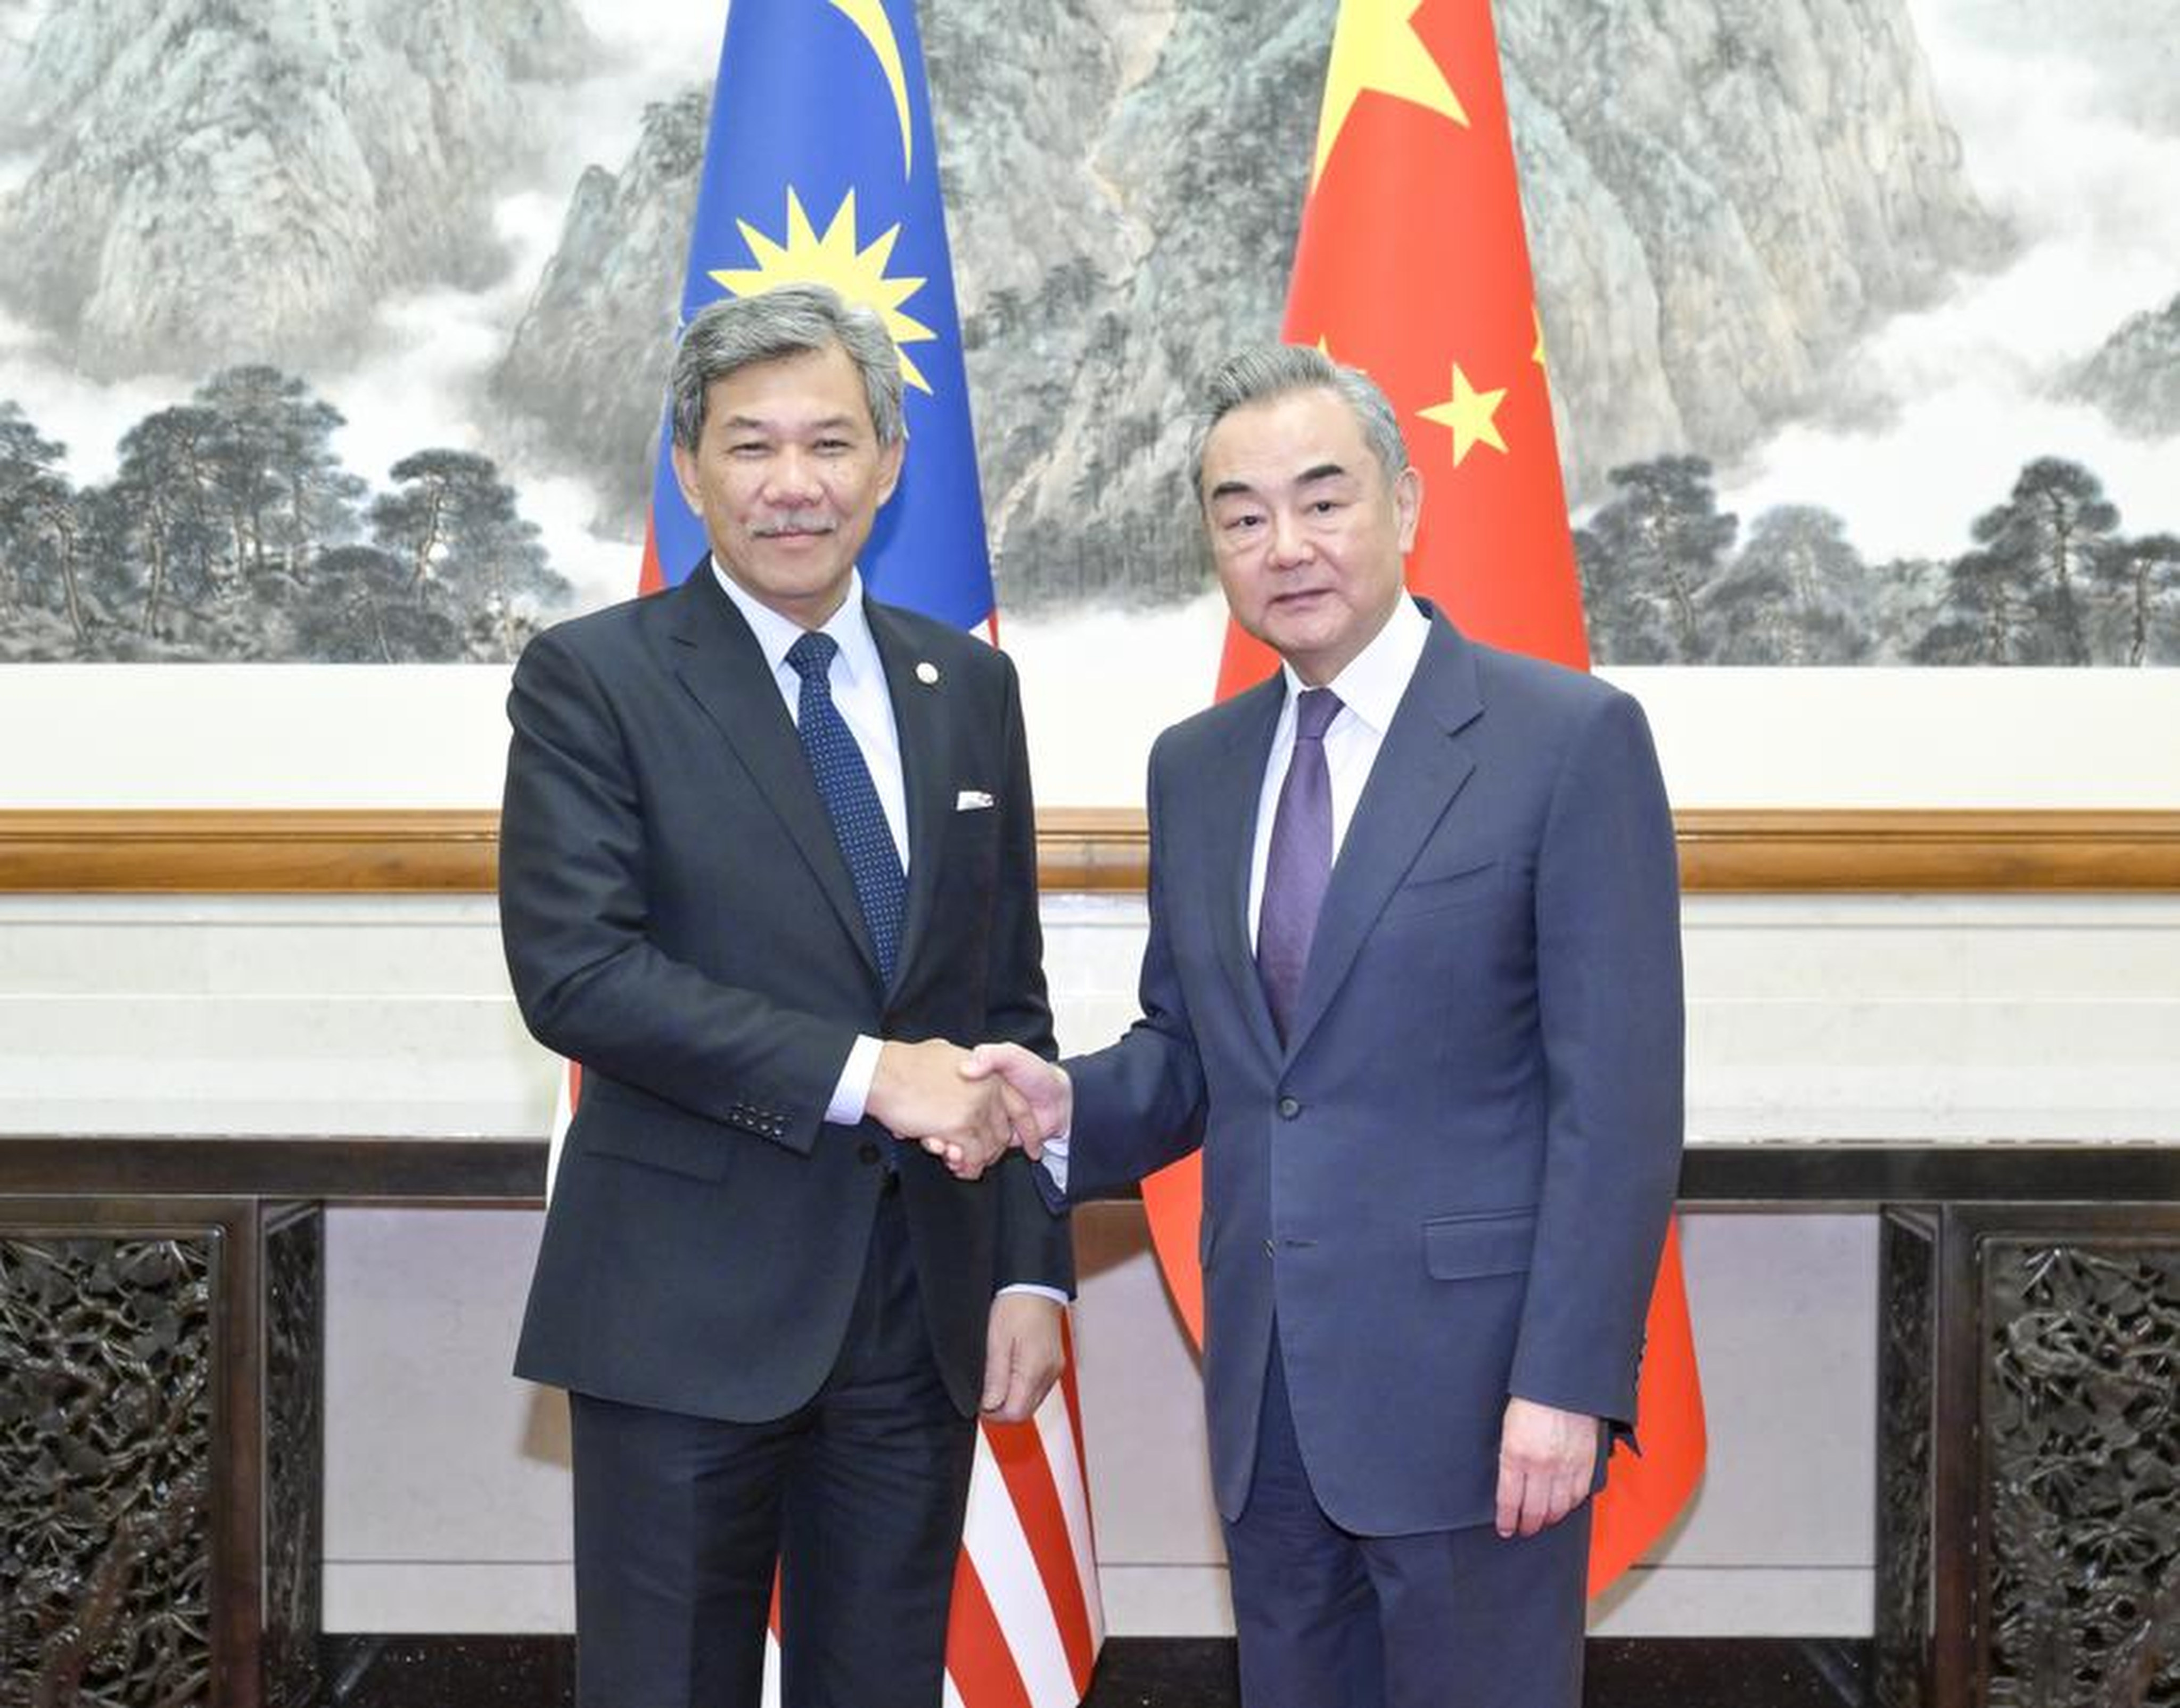 Visiting Malaysian Foreign Minister Mohamad Hasan largely echoed Beijing’s position on South China Sea issues, saying his country opposes ‘external forces’ in the region. Photo: Xinhua